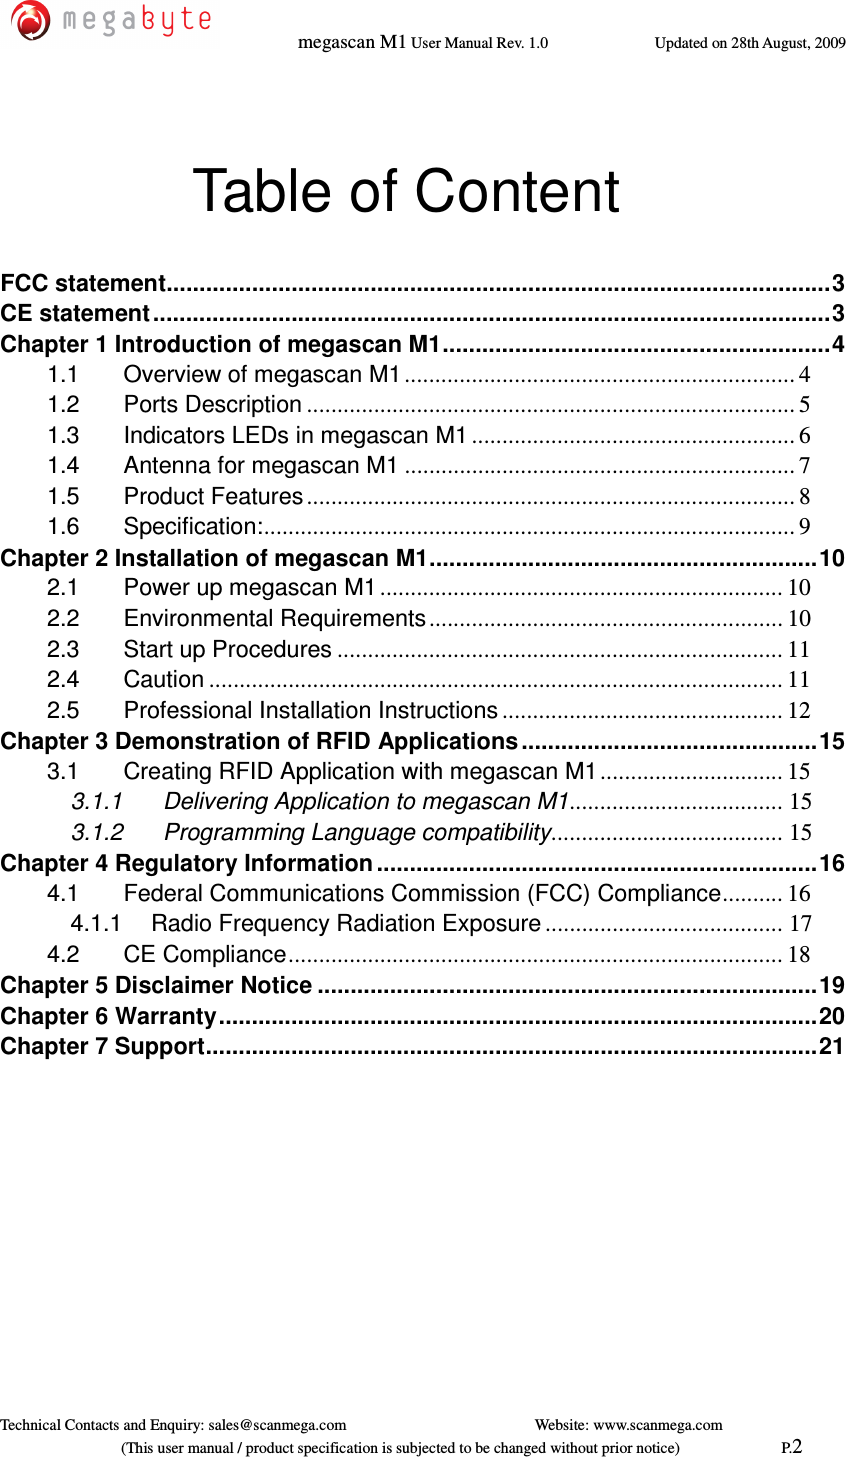   megascan M1 User Manual Rev. 1.0  Updated on 28th August, 2009     Technical Contacts and Enquiry: sales@scanmega.com          Website: www.scanmega.com                             (This user manual / product specification is subjected to be changed without prior notice)                          P.2  Table of Content  FCC statement..................................................................................................... 3 CE statement ....................................................................................................... 3 Chapter 1 Introduction of megascan M1 ........................................................... 4 1.1 Overview of megascan M1 ................................................................ 4 1.2 Ports Description ................................................................................ 5 1.3 Indicators LEDs in megascan M1 ..................................................... 6 1.4 Antenna for megascan M1 ................................................................ 7 1.5 Product Features ................................................................................ 8 1.6 Specification: ....................................................................................... 9 Chapter 2 Installation of megascan M1 ........................................................... 10 2.1 Power up megascan M1 .................................................................. 10 2.2 Environmental Requirements .......................................................... 10 2.3 Start up Procedures ......................................................................... 11 2.4 Caution .............................................................................................. 11 2.5 Professional Installation Instructions .............................................. 12 Chapter 3 Demonstration of RFID Applications ............................................. 15 3.1 Creating RFID Application with megascan M1 .............................. 15 3.1.1   Delivering Application to megascan M1 ................................... 15 3.1.2   Programming Language compatibility ...................................... 15 Chapter 4 Regulatory Information ................................................................... 16 4.1 Federal Communications Commission (FCC) Compliance .......... 16 4.1.1 Radio Frequency Radiation Exposure ....................................... 17 4.2 CE Compliance ................................................................................. 18 Chapter 5 Disclaimer Notice ............................................................................ 19 Chapter 6 Warranty ........................................................................................... 20 Chapter 7 Support ............................................................................................. 21 